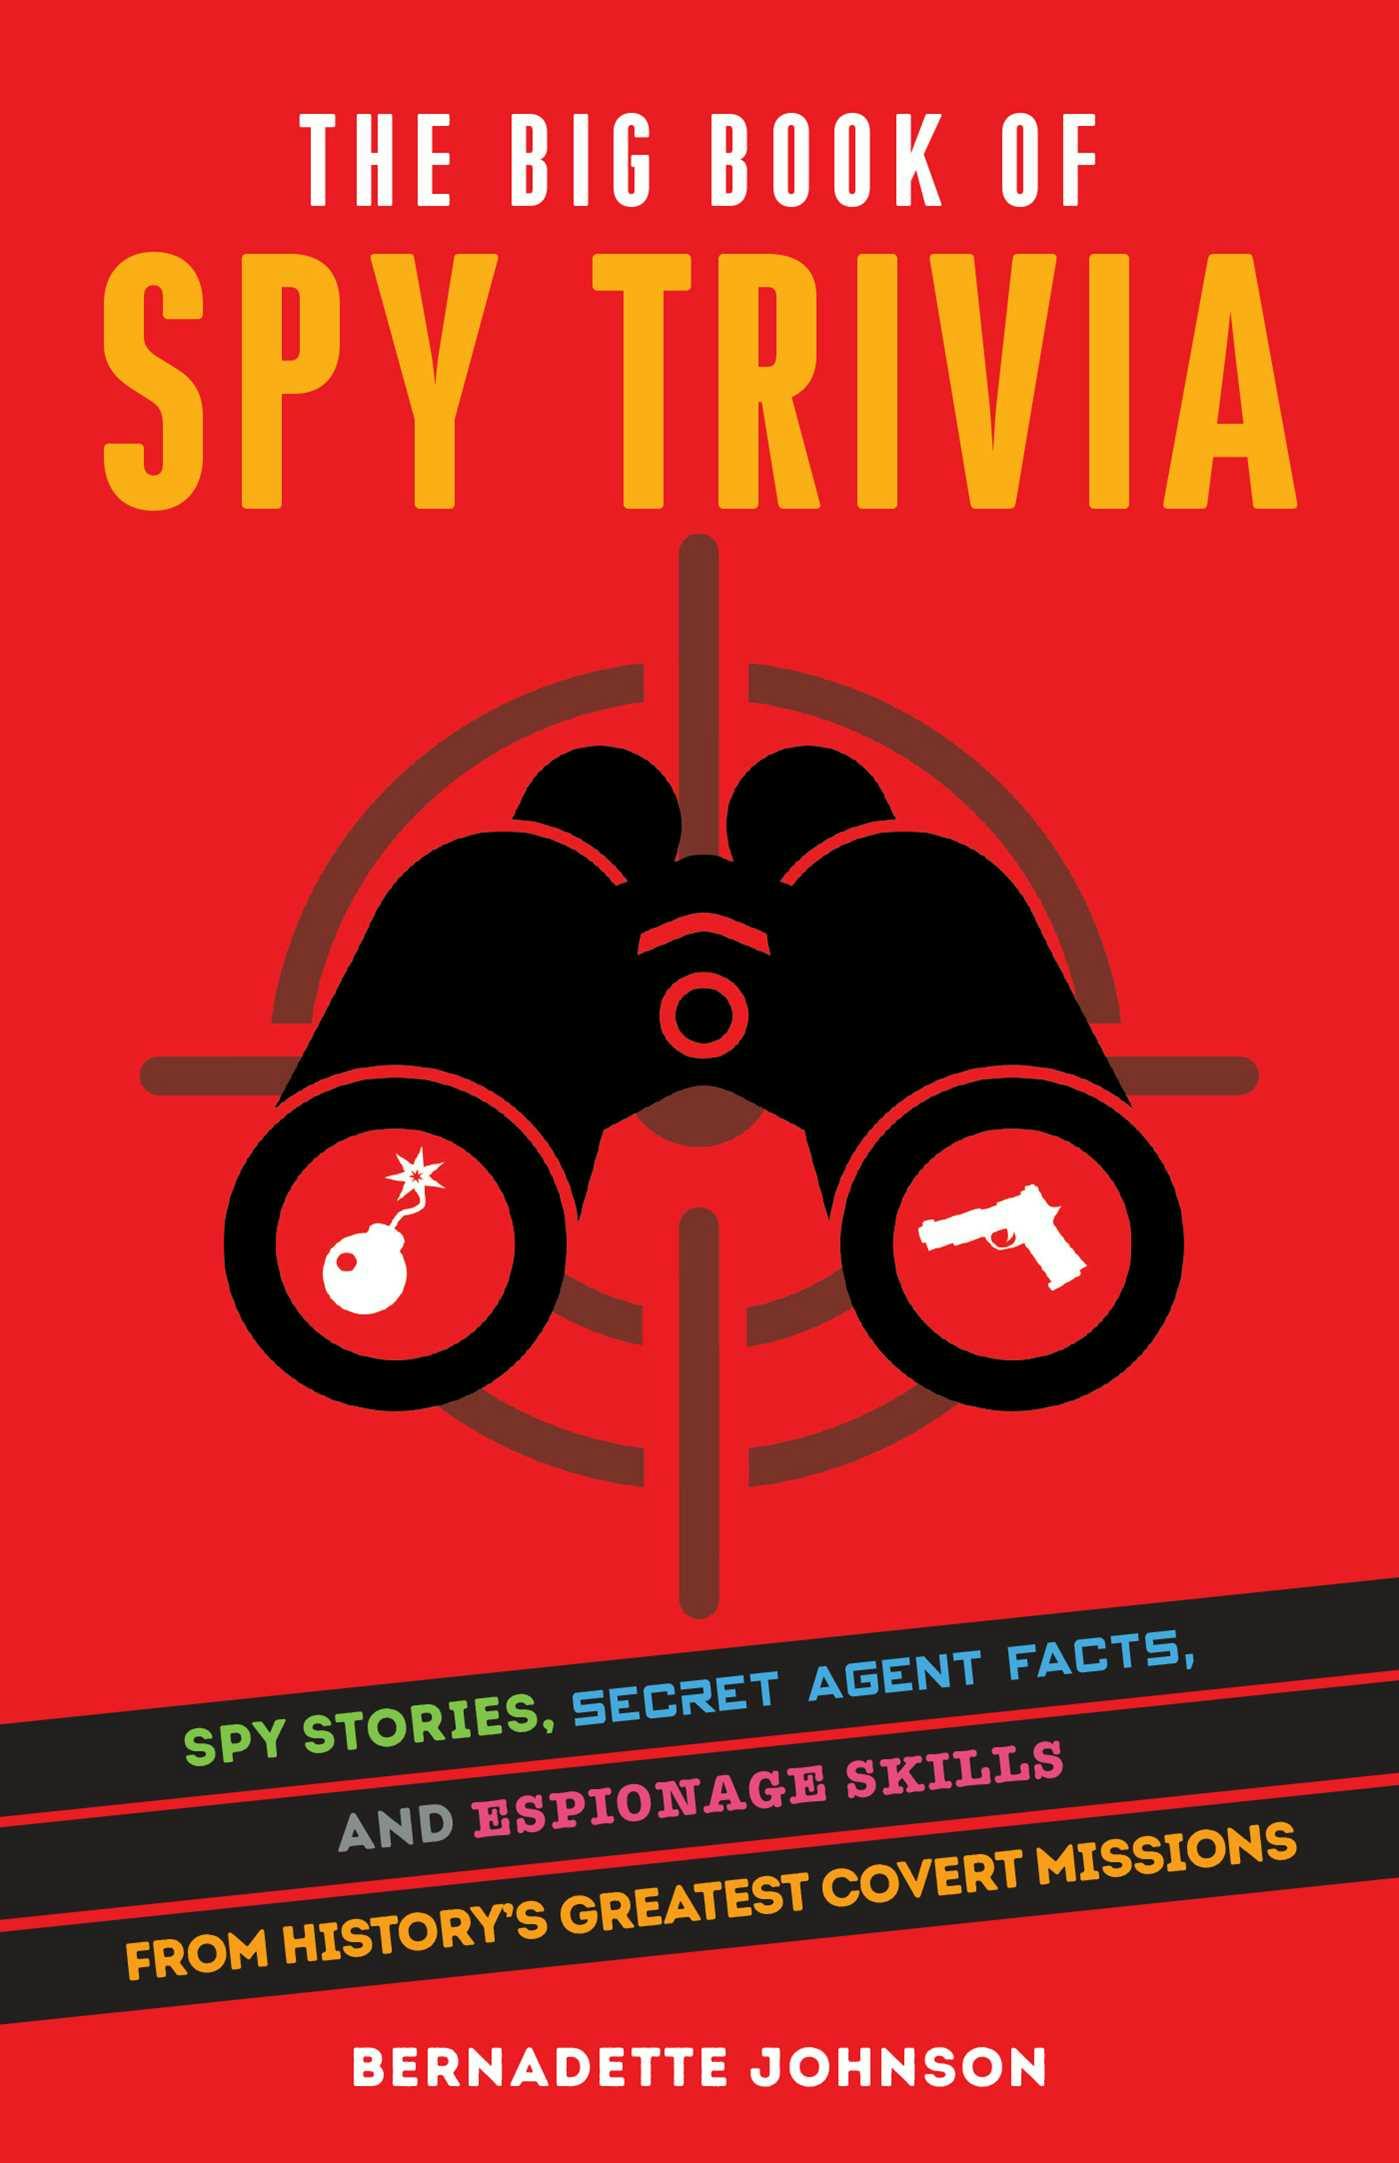 The Big Book of Spy Trivia: Spy Stories, Secret Agent Facts, and Espionage Skills from History's Greatest Covert Missions - Bernadette Johnson